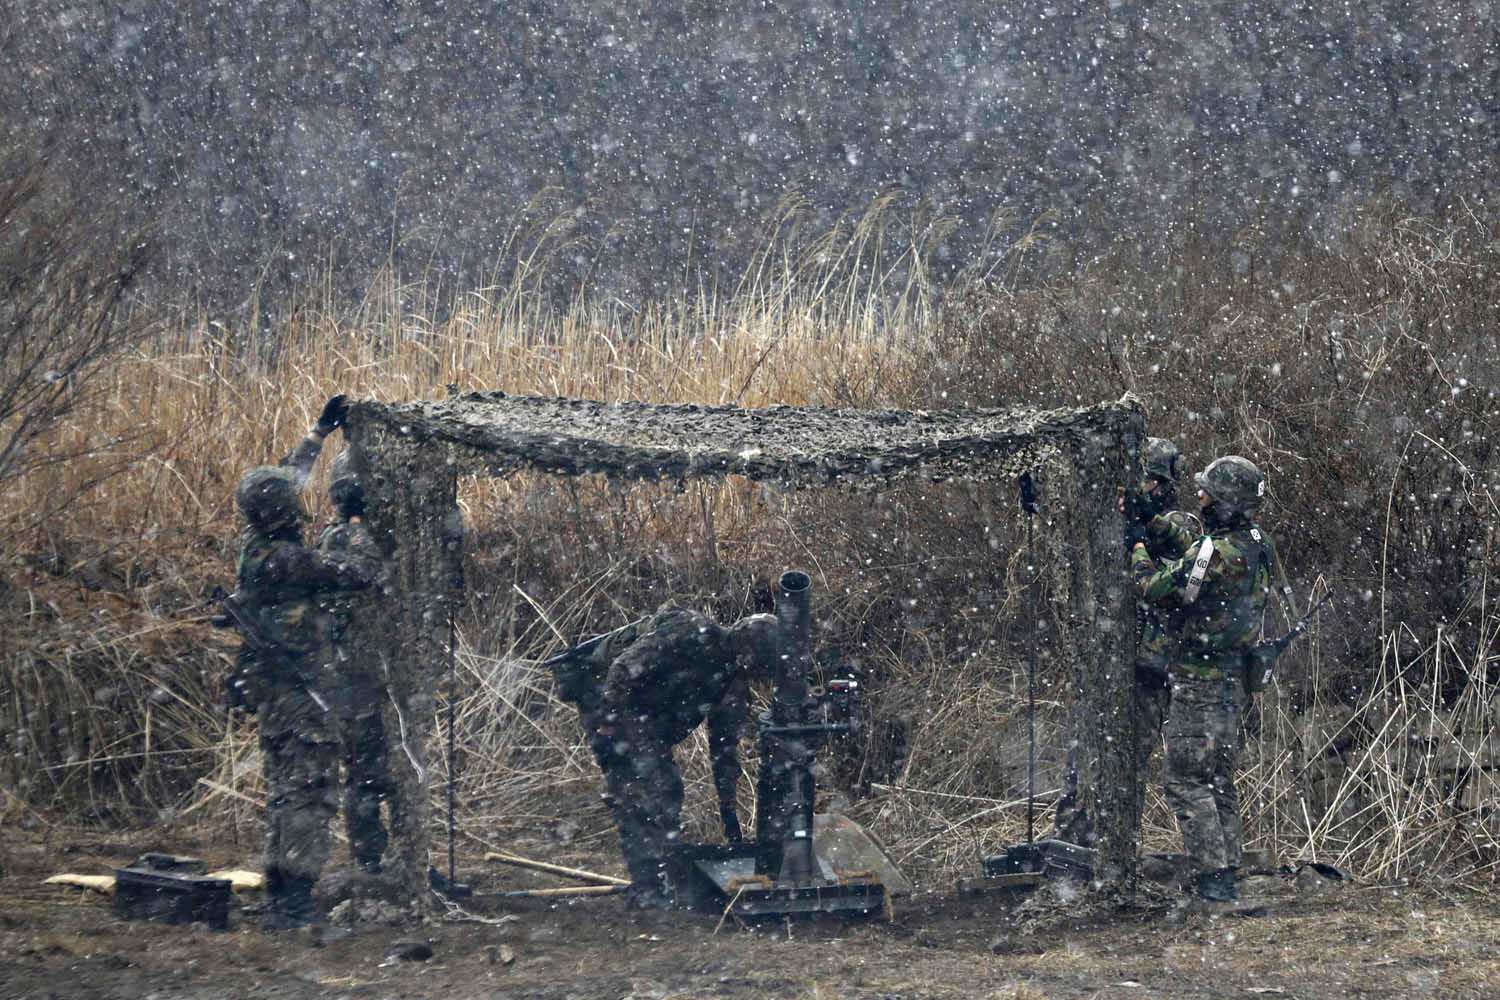 South Korean soldiers of an artillery unit check their gears during a drill as it snows in Hwacheon